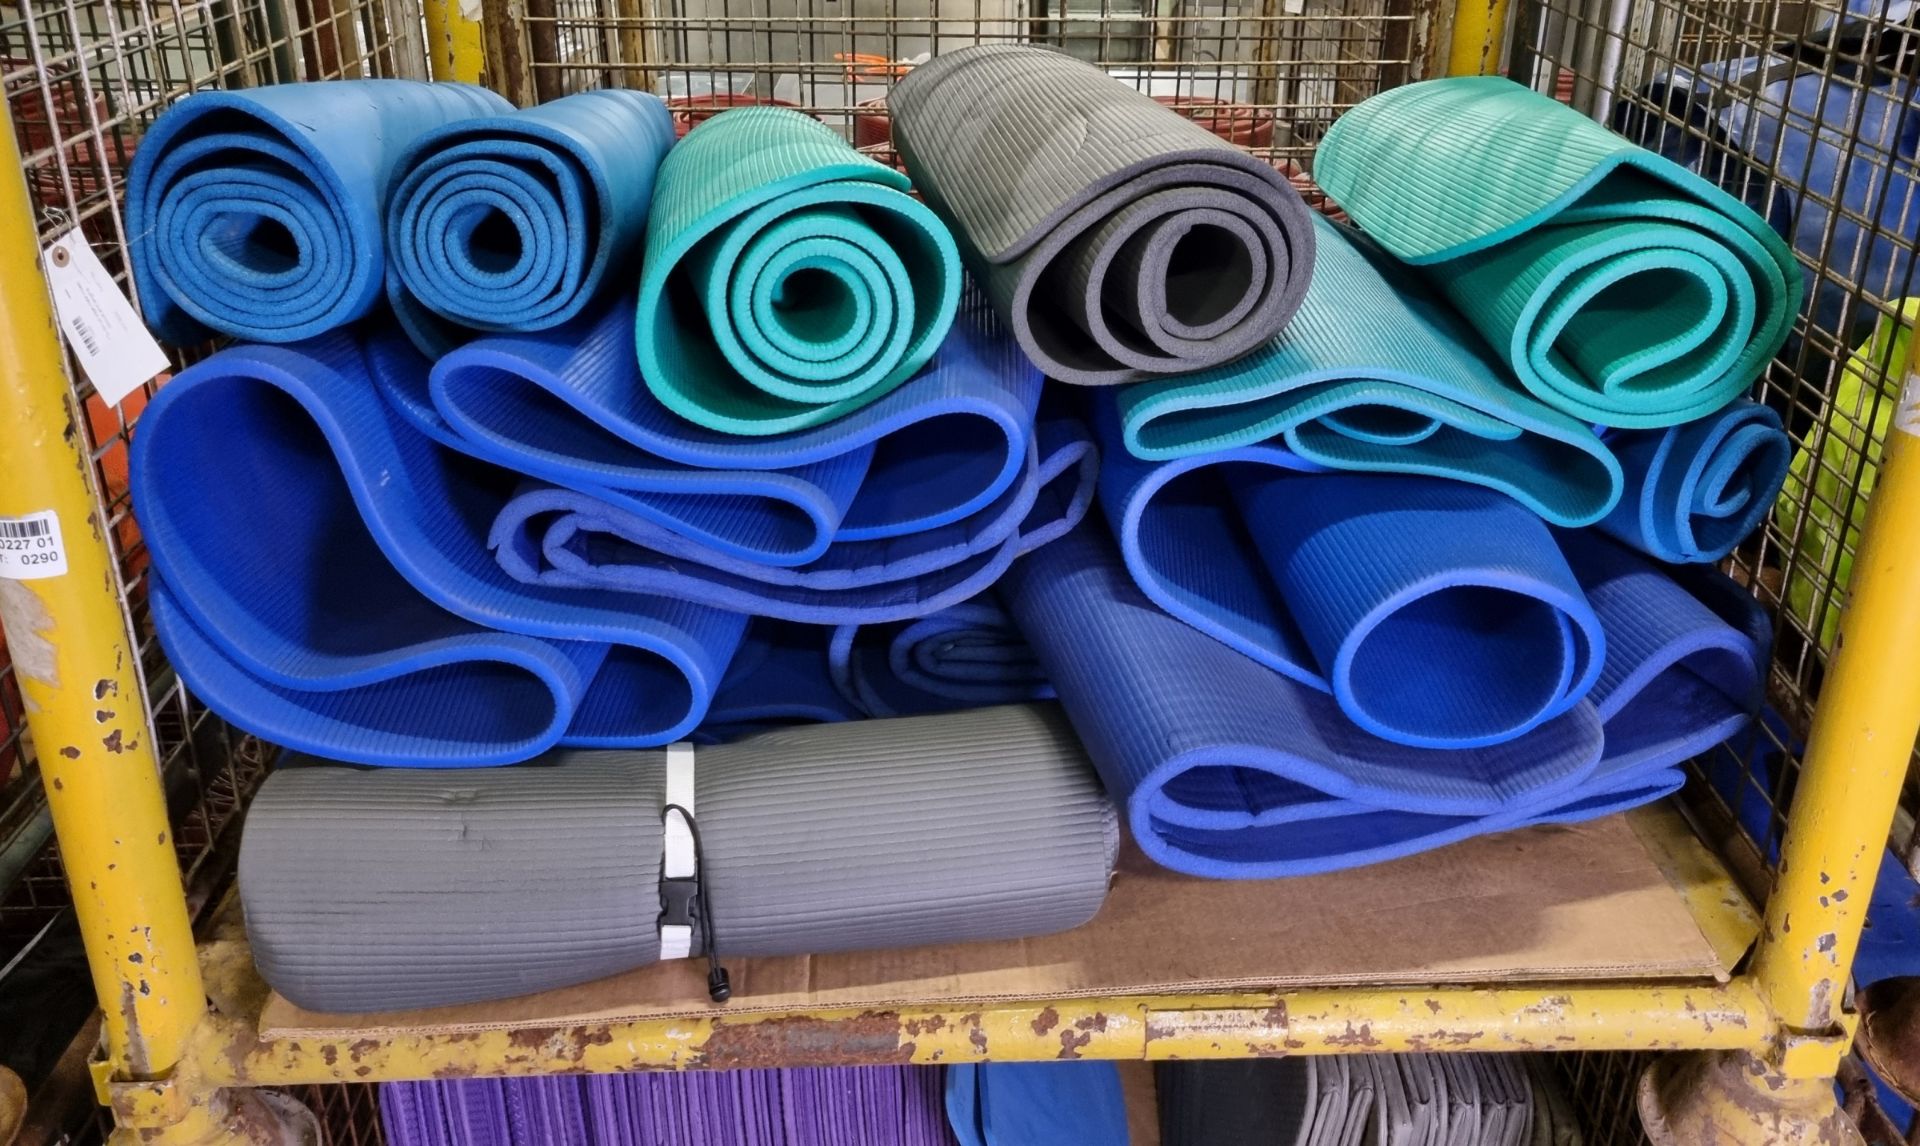 35x folding yoga mats, 17x roll-up yoga mats mixed colours and lengths - Image 3 of 5